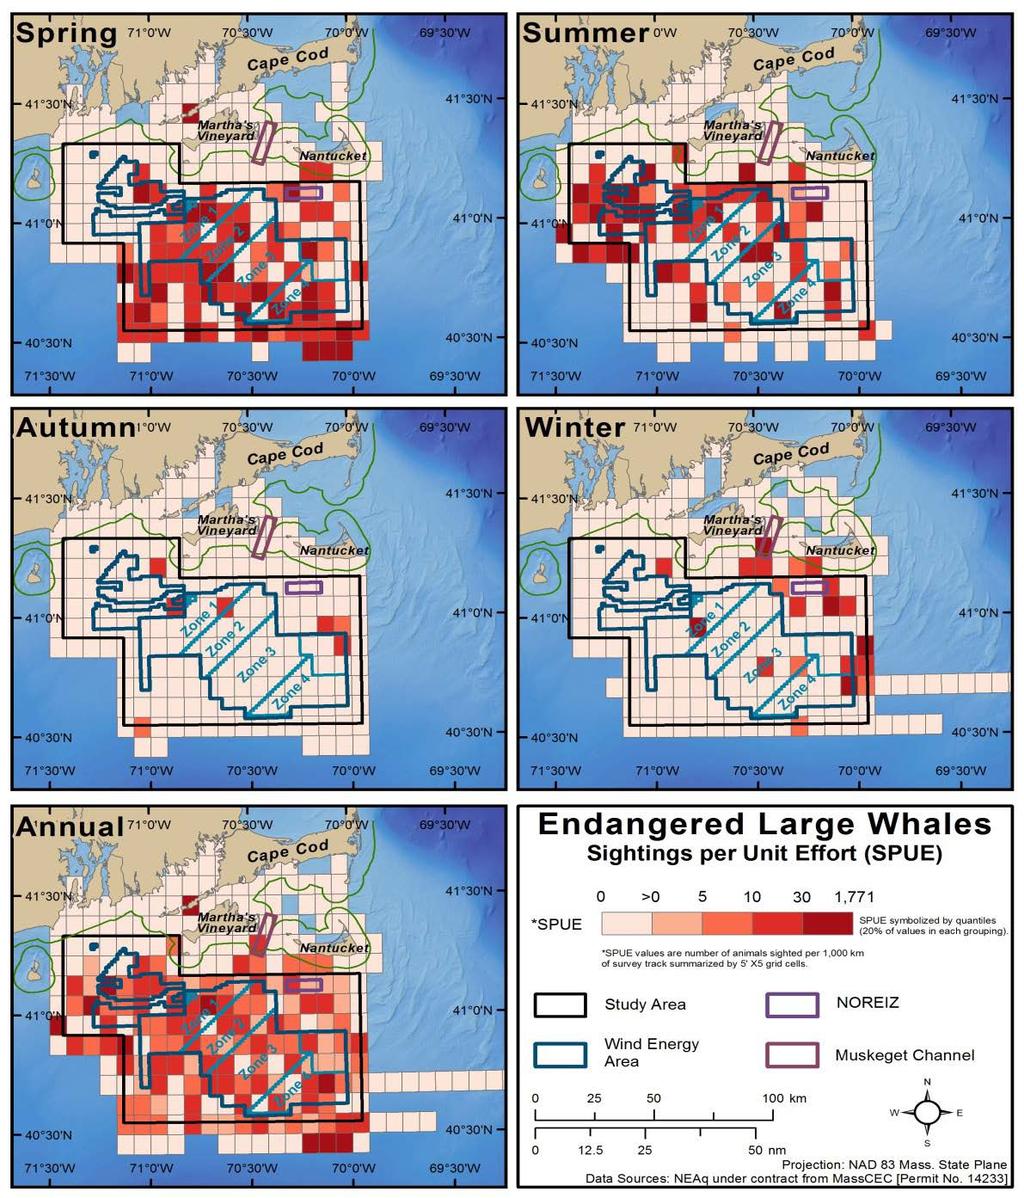 Seasonal Patterns for Endangered Large Whales Different seasonal patterns (from Kraus et al. 2016.